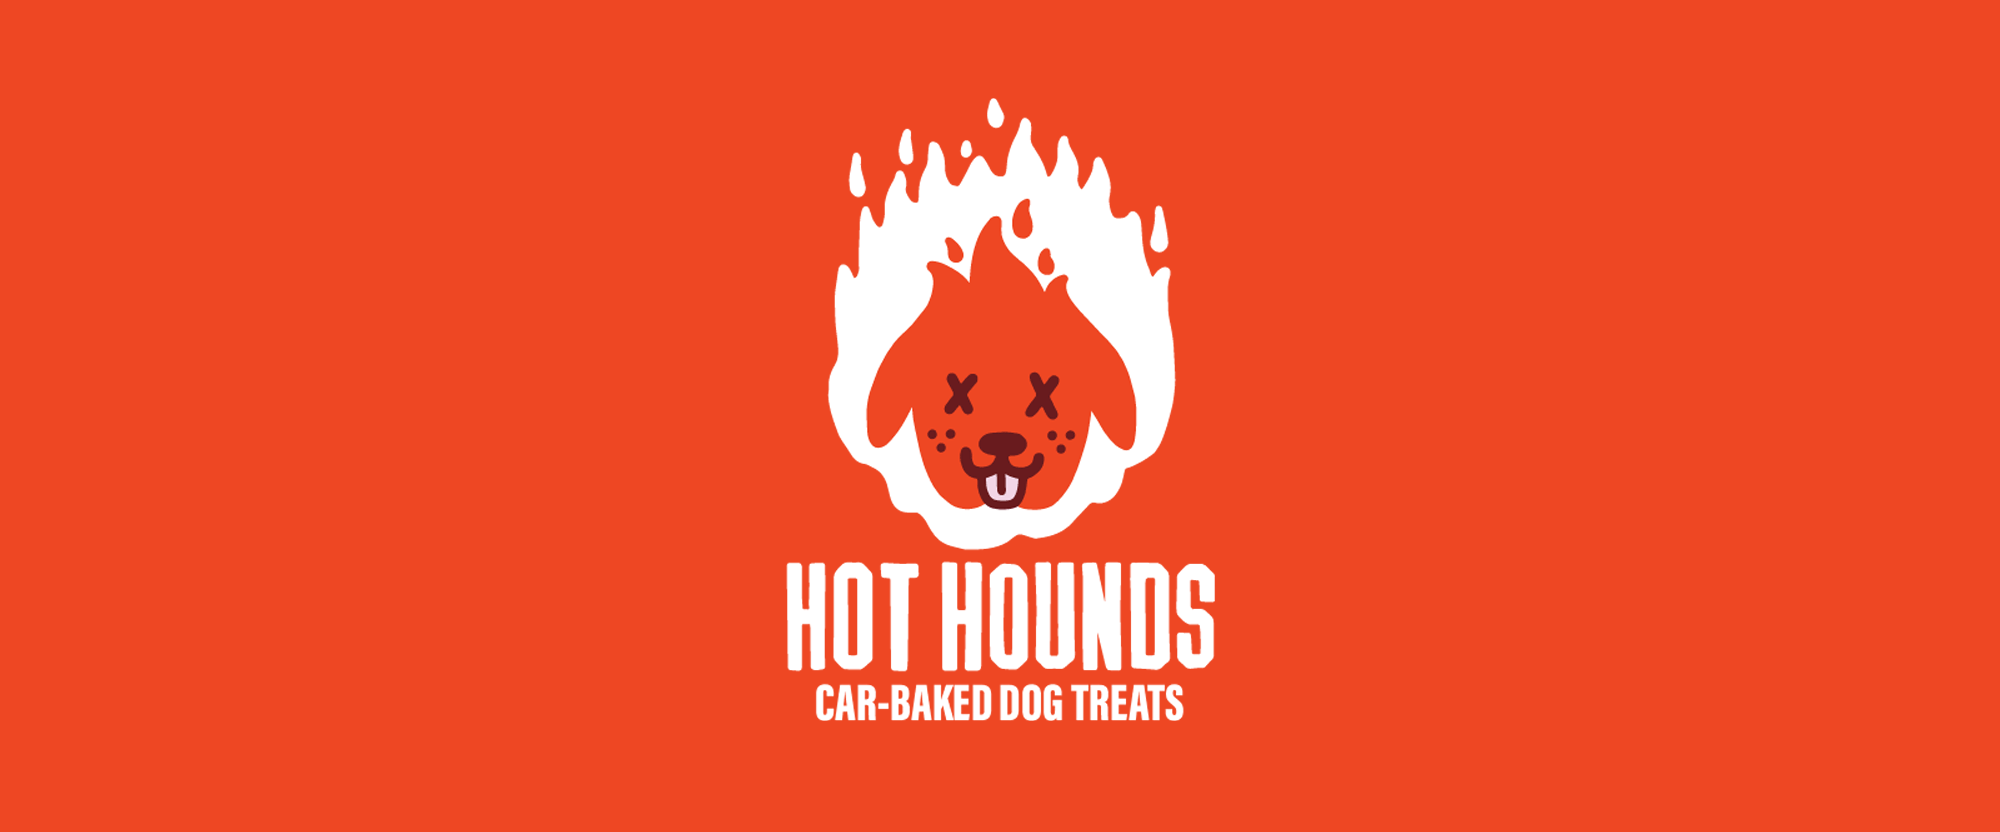 New Logo and Packaging for Hot Hounds by Rethink